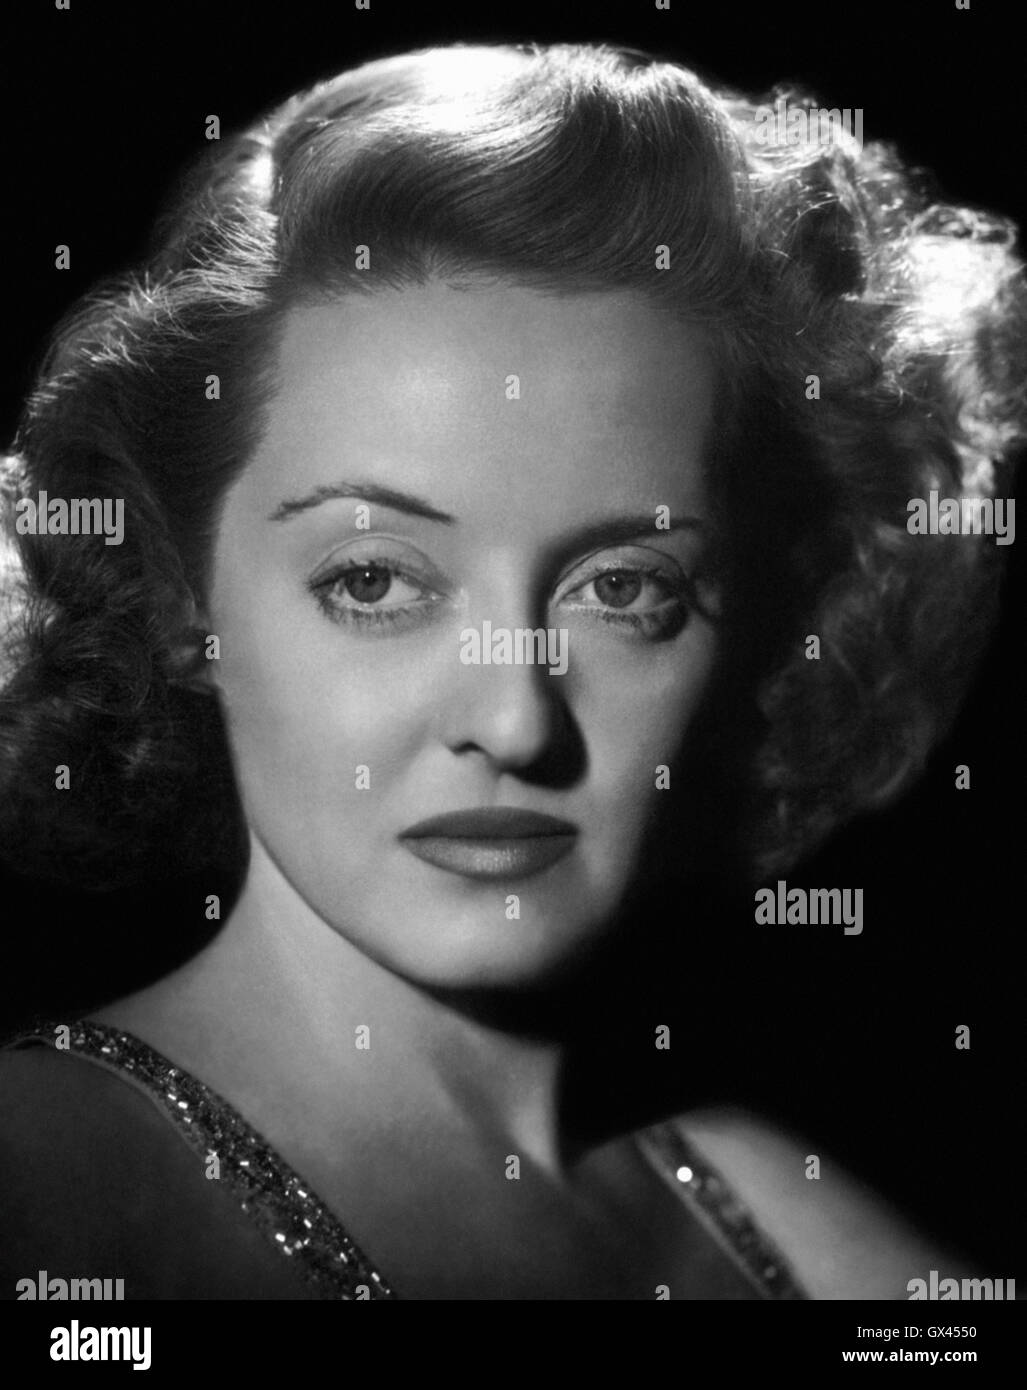 William wyler bette davis Black and White Stock Photos & Images - Alamy